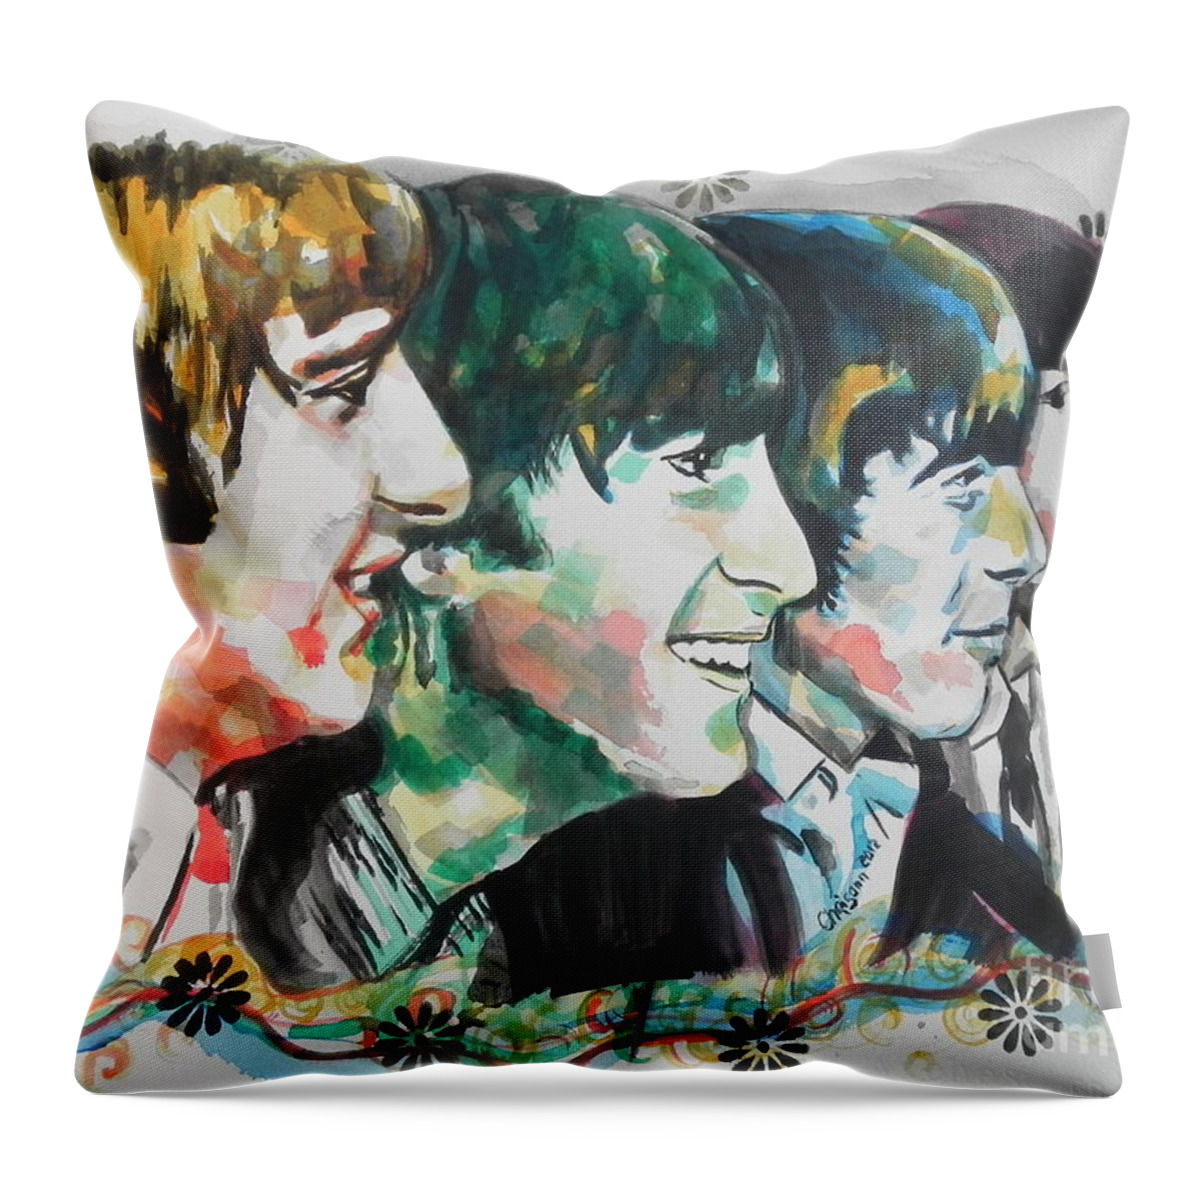 Watercolor Painting Throw Pillow featuring the painting The Beatles 01 by Chrisann Ellis